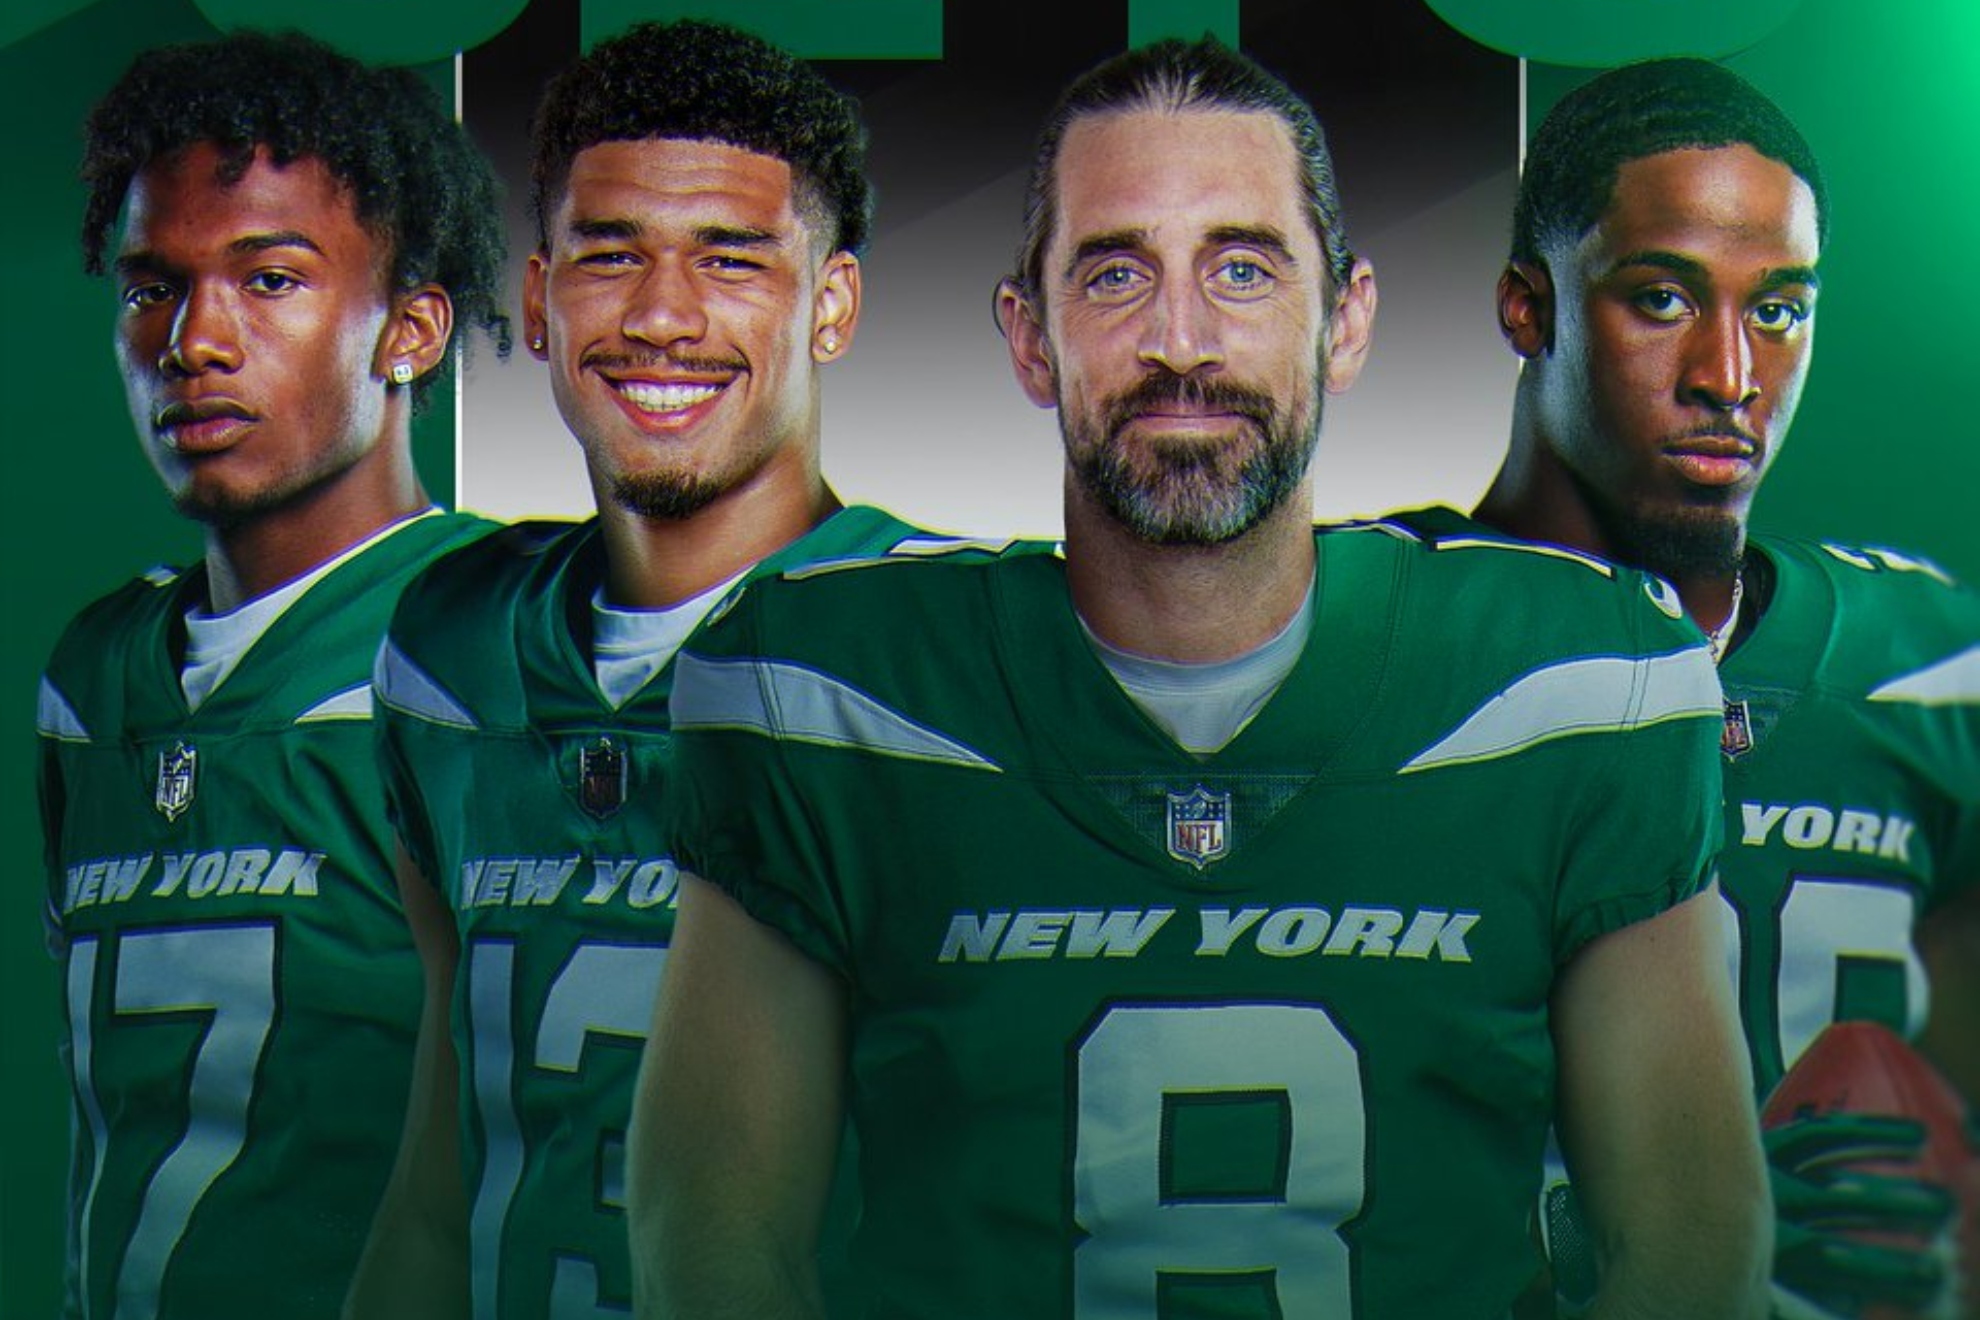 The NFL world is buzzing after the Jets landed Aaron Rodgers